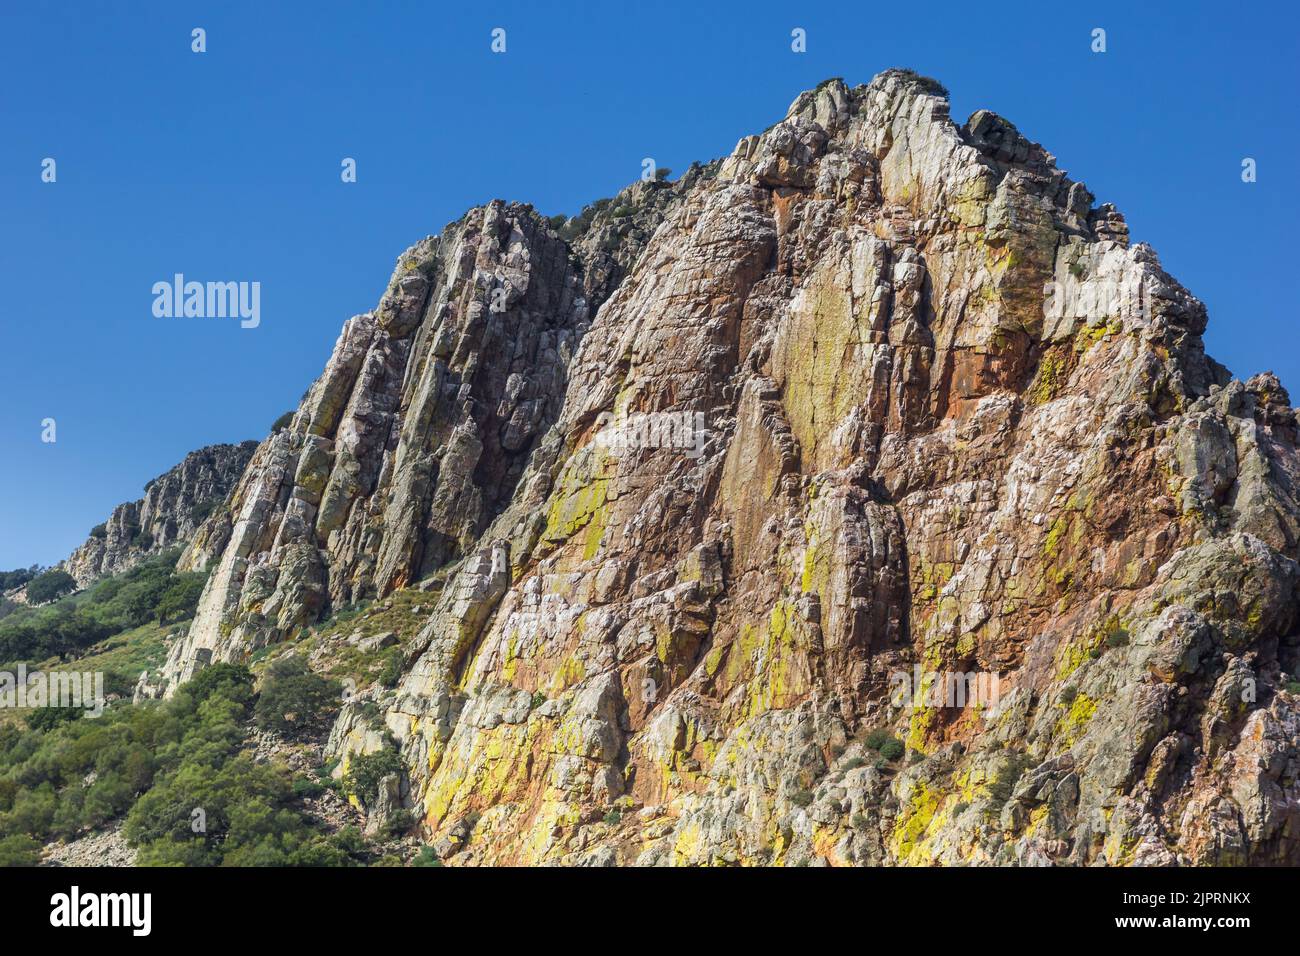 Colorful rocks of the Monfrague national park, Spain Stock Photo